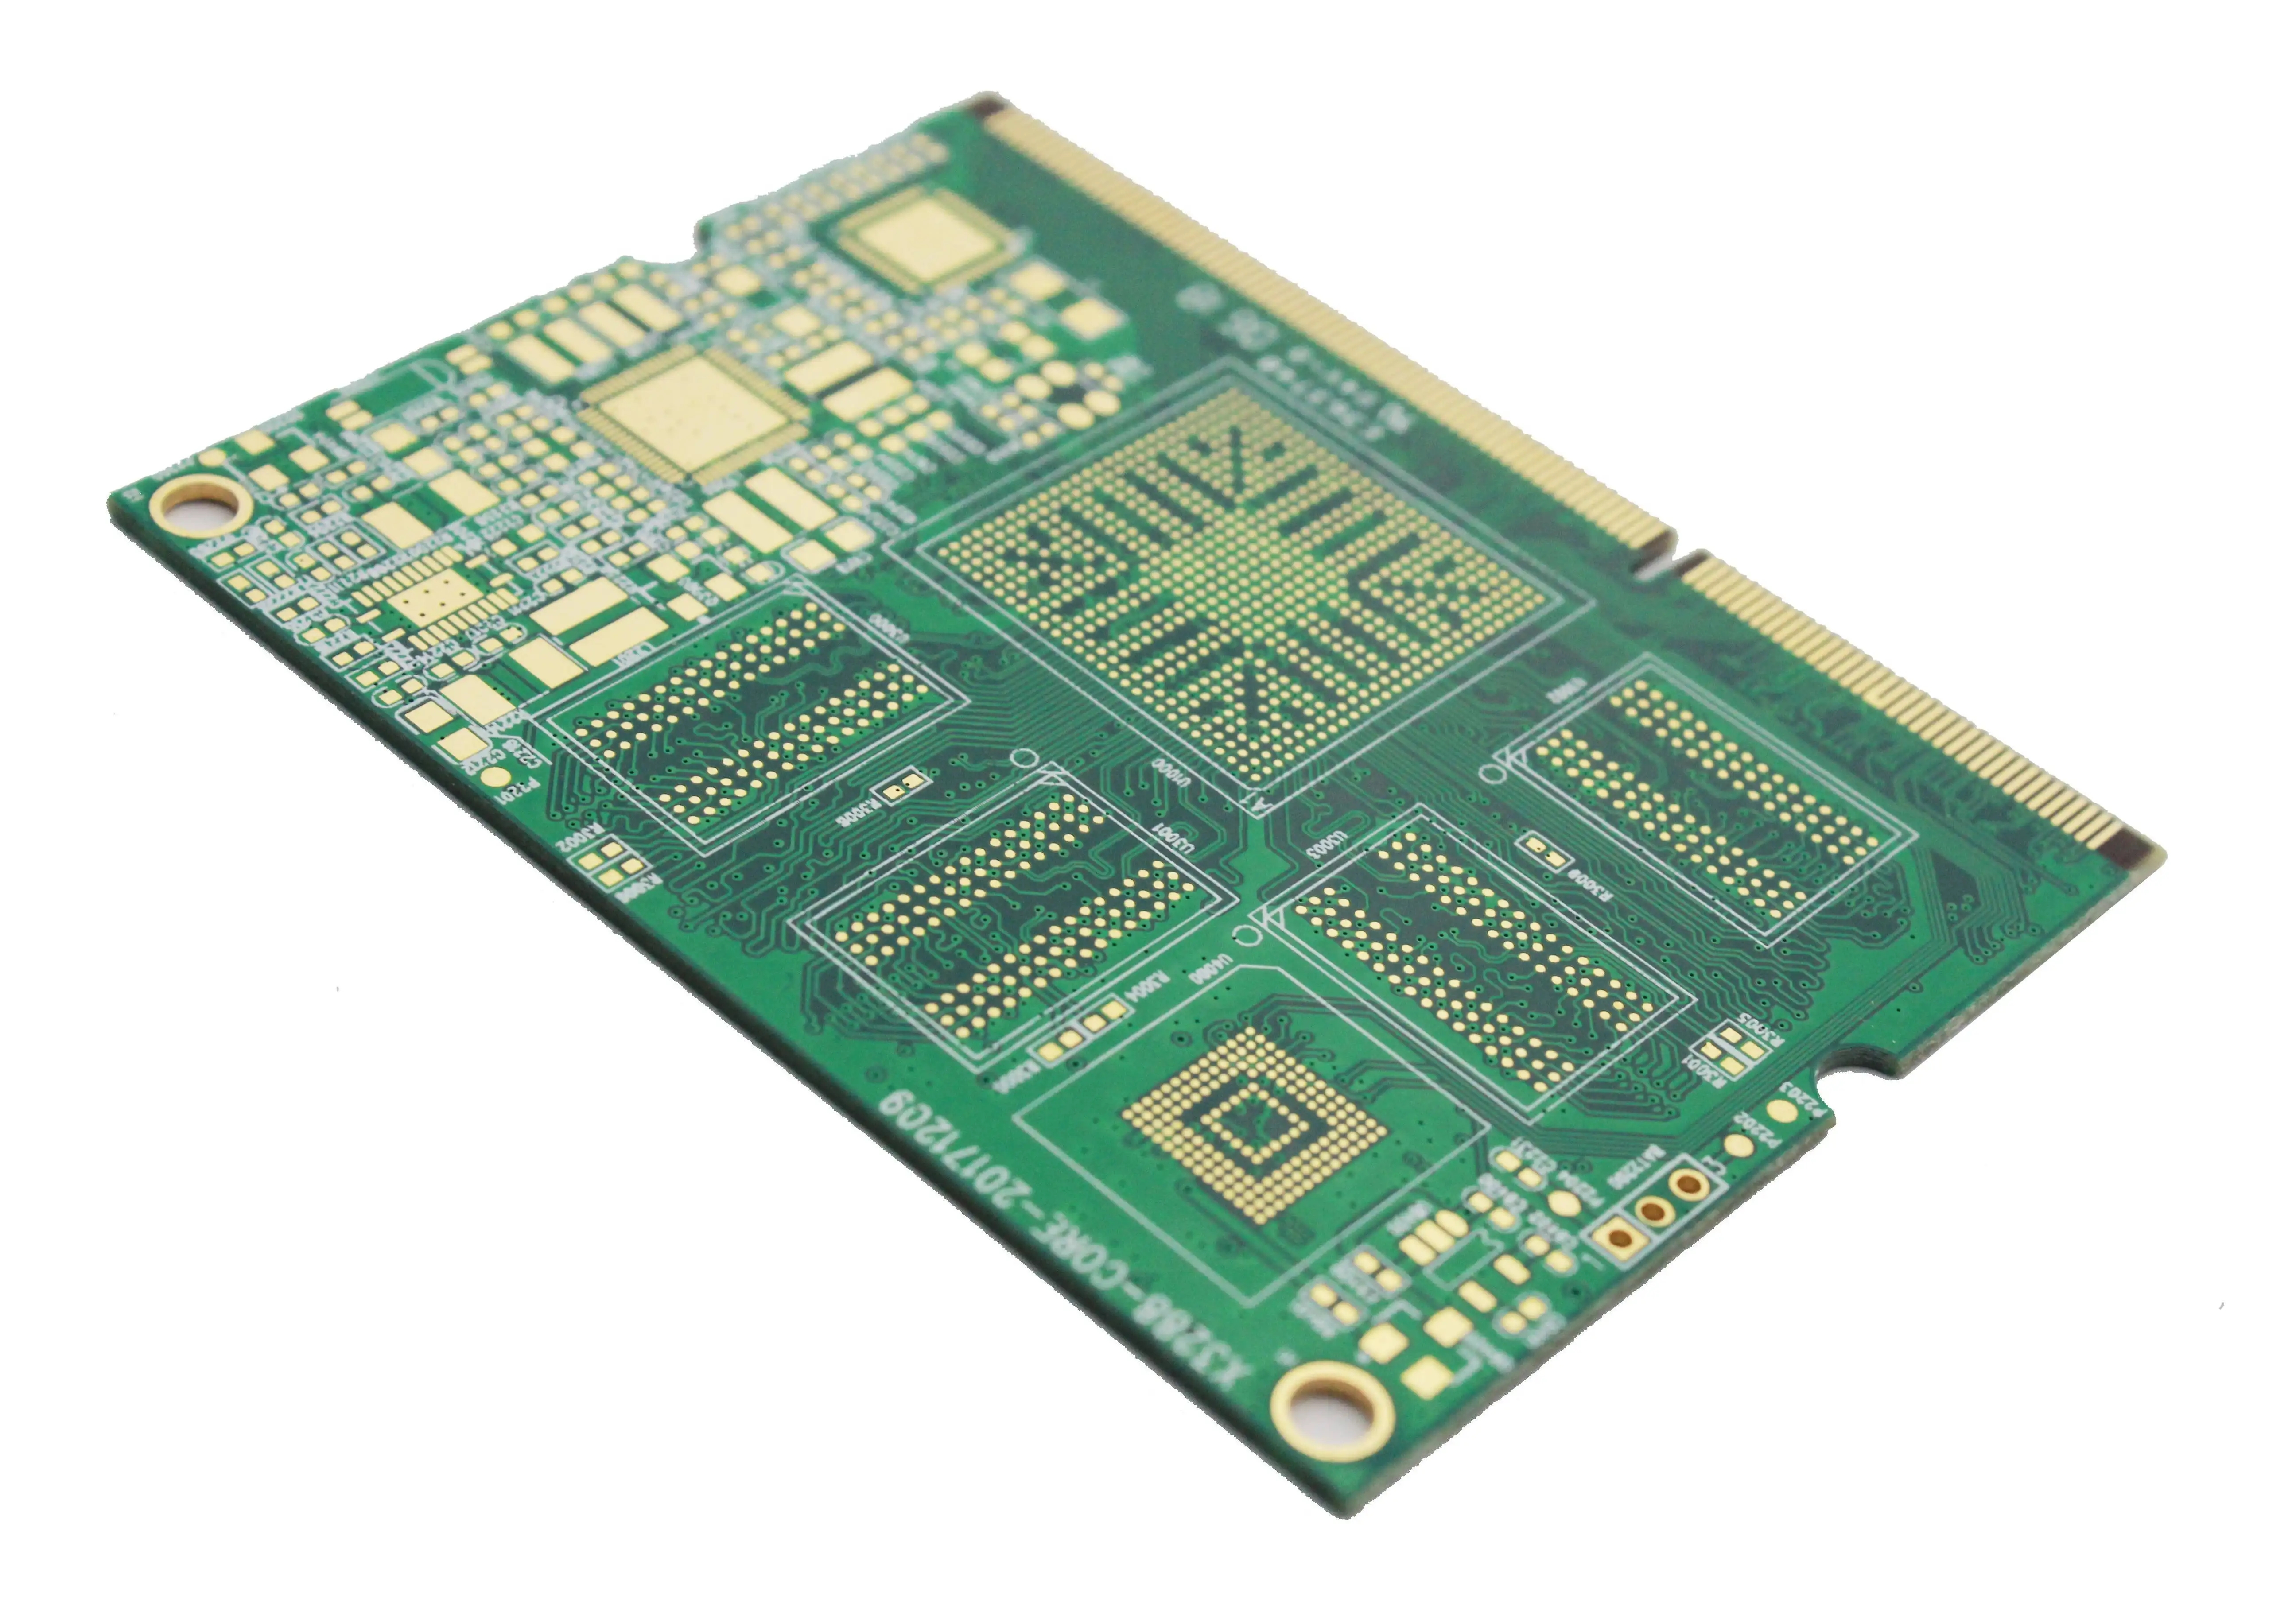 Detailed explanation of inspection methods and processes that PCB has to know